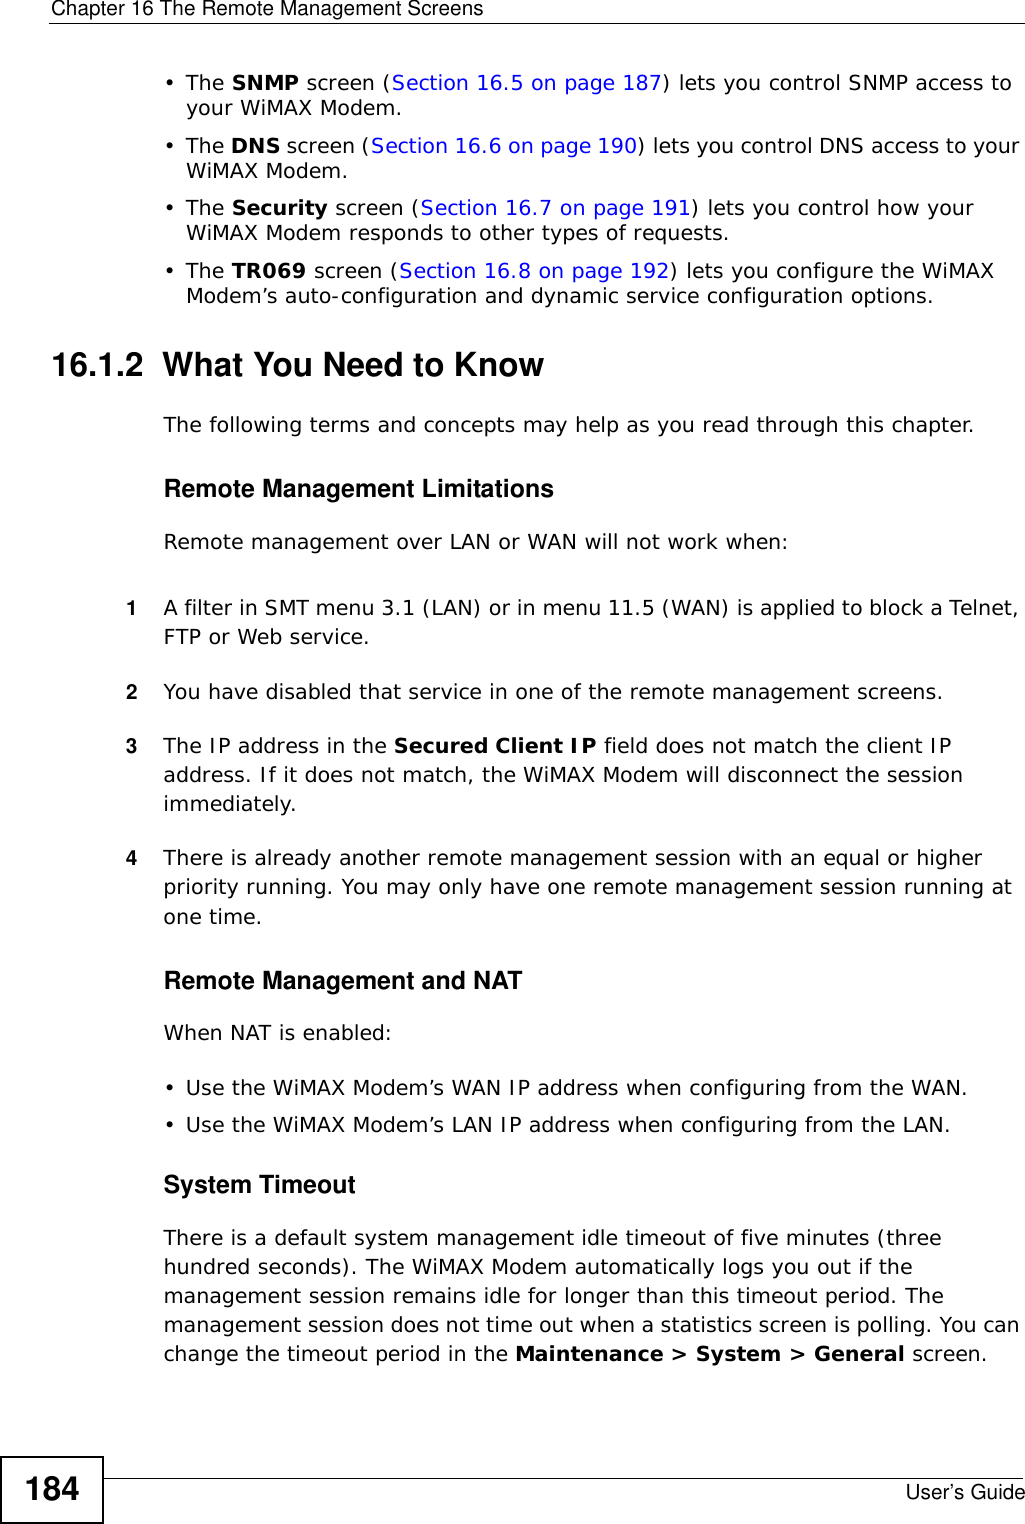 Chapter 16 The Remote Management ScreensUser’s Guide184•The SNMP screen (Section 16.5 on page 187) lets you control SNMP access to your WiMAX Modem.•The DNS screen (Section 16.6 on page 190) lets you control DNS access to your WiMAX Modem.•The Security screen (Section 16.7 on page 191) lets you control how your WiMAX Modem responds to other types of requests.•The TR069 screen (Section 16.8 on page 192) lets you configure the WiMAX Modem’s auto-configuration and dynamic service configuration options.16.1.2  What You Need to KnowThe following terms and concepts may help as you read through this chapter.Remote Management LimitationsRemote management over LAN or WAN will not work when:1A filter in SMT menu 3.1 (LAN) or in menu 11.5 (WAN) is applied to block a Telnet, FTP or Web service. 2You have disabled that service in one of the remote management screens.3The IP address in the Secured Client IP field does not match the client IP address. If it does not match, the WiMAX Modem will disconnect the session immediately.4There is already another remote management session with an equal or higher priority running. You may only have one remote management session running at one time.Remote Management and NATWhen NAT is enabled:• Use the WiMAX Modem’s WAN IP address when configuring from the WAN. • Use the WiMAX Modem’s LAN IP address when configuring from the LAN.System TimeoutThere is a default system management idle timeout of five minutes (three hundred seconds). The WiMAX Modem automatically logs you out if the management session remains idle for longer than this timeout period. The management session does not time out when a statistics screen is polling. You can change the timeout period in the Maintenance &gt; System &gt; General screen.